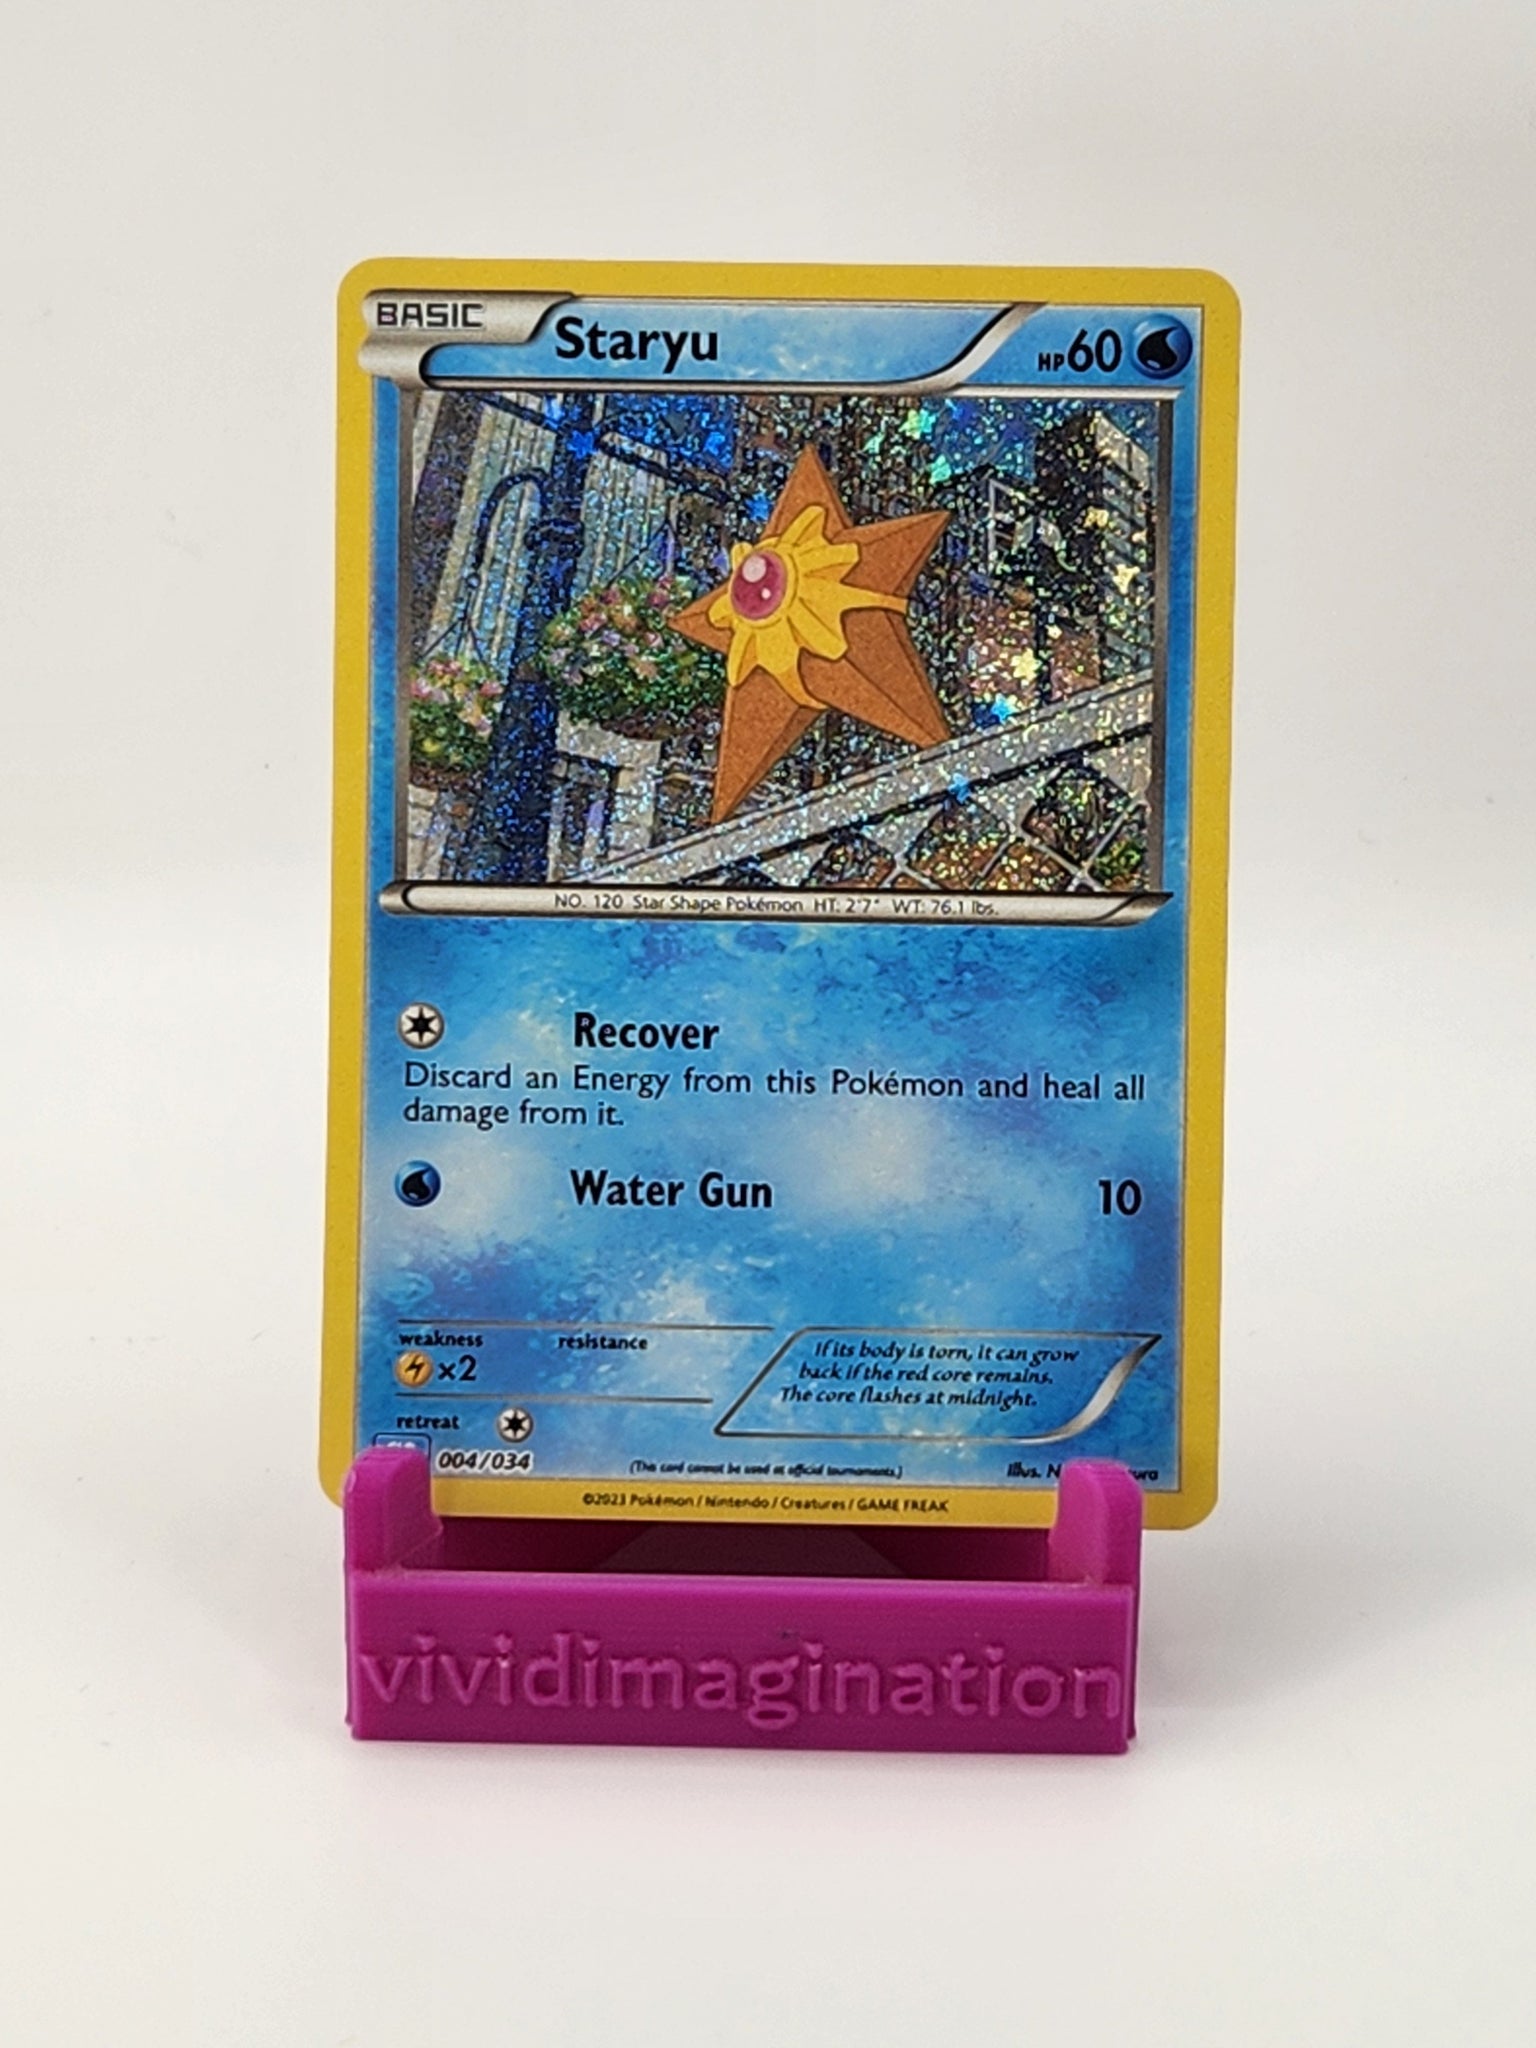 Staryu 004/034 - All the best items from Vivid Imagination Cards and Collectibles - Just $1.49! Shop now at Vivid Imagination Cards and Collectibles